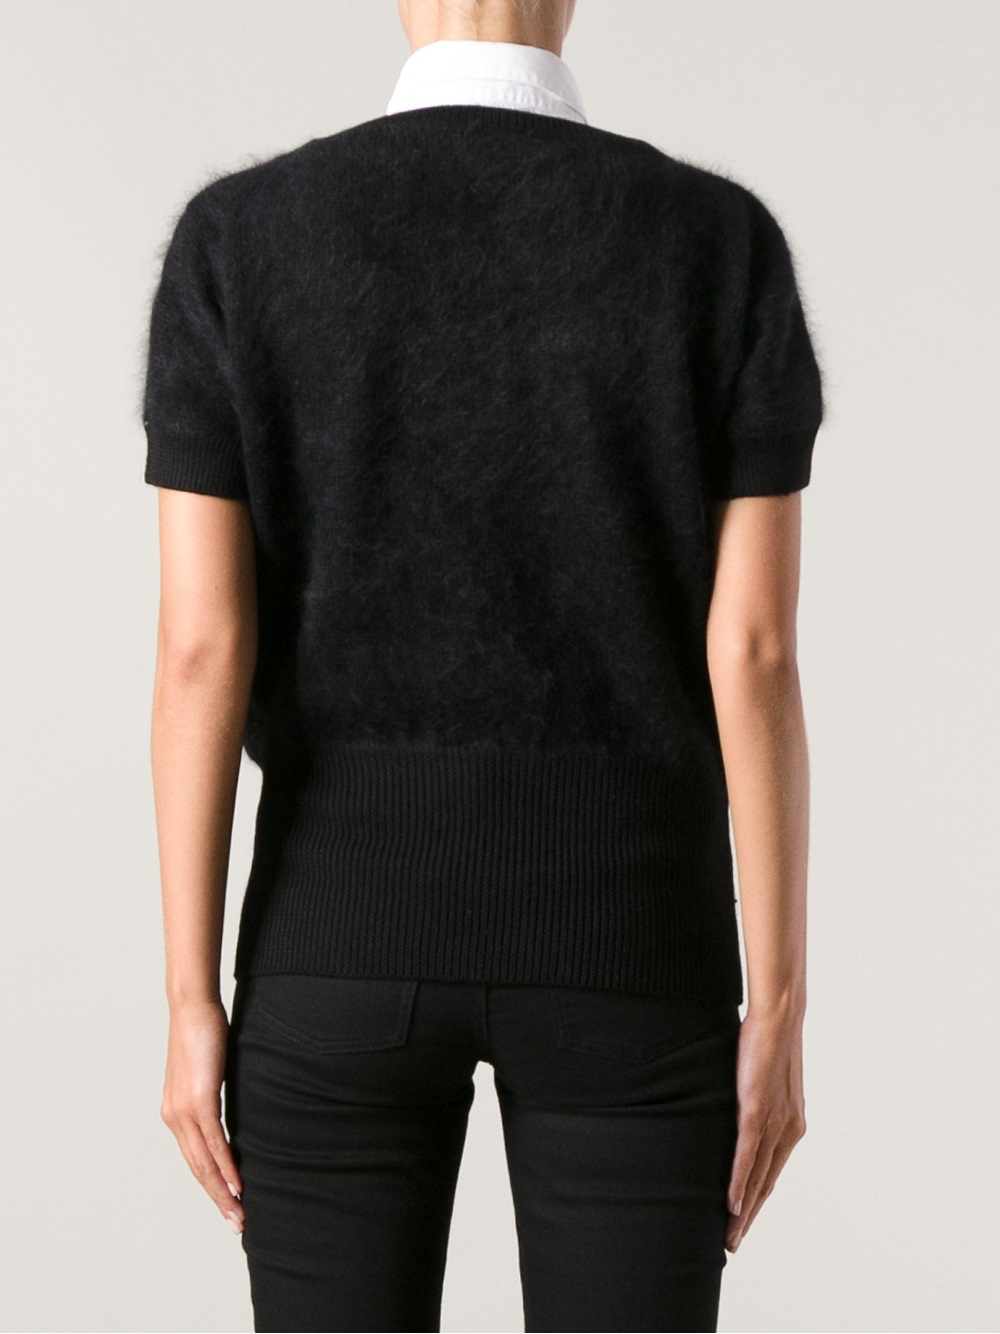 Lyst - Gucci Short Sleeve Sweater in Black